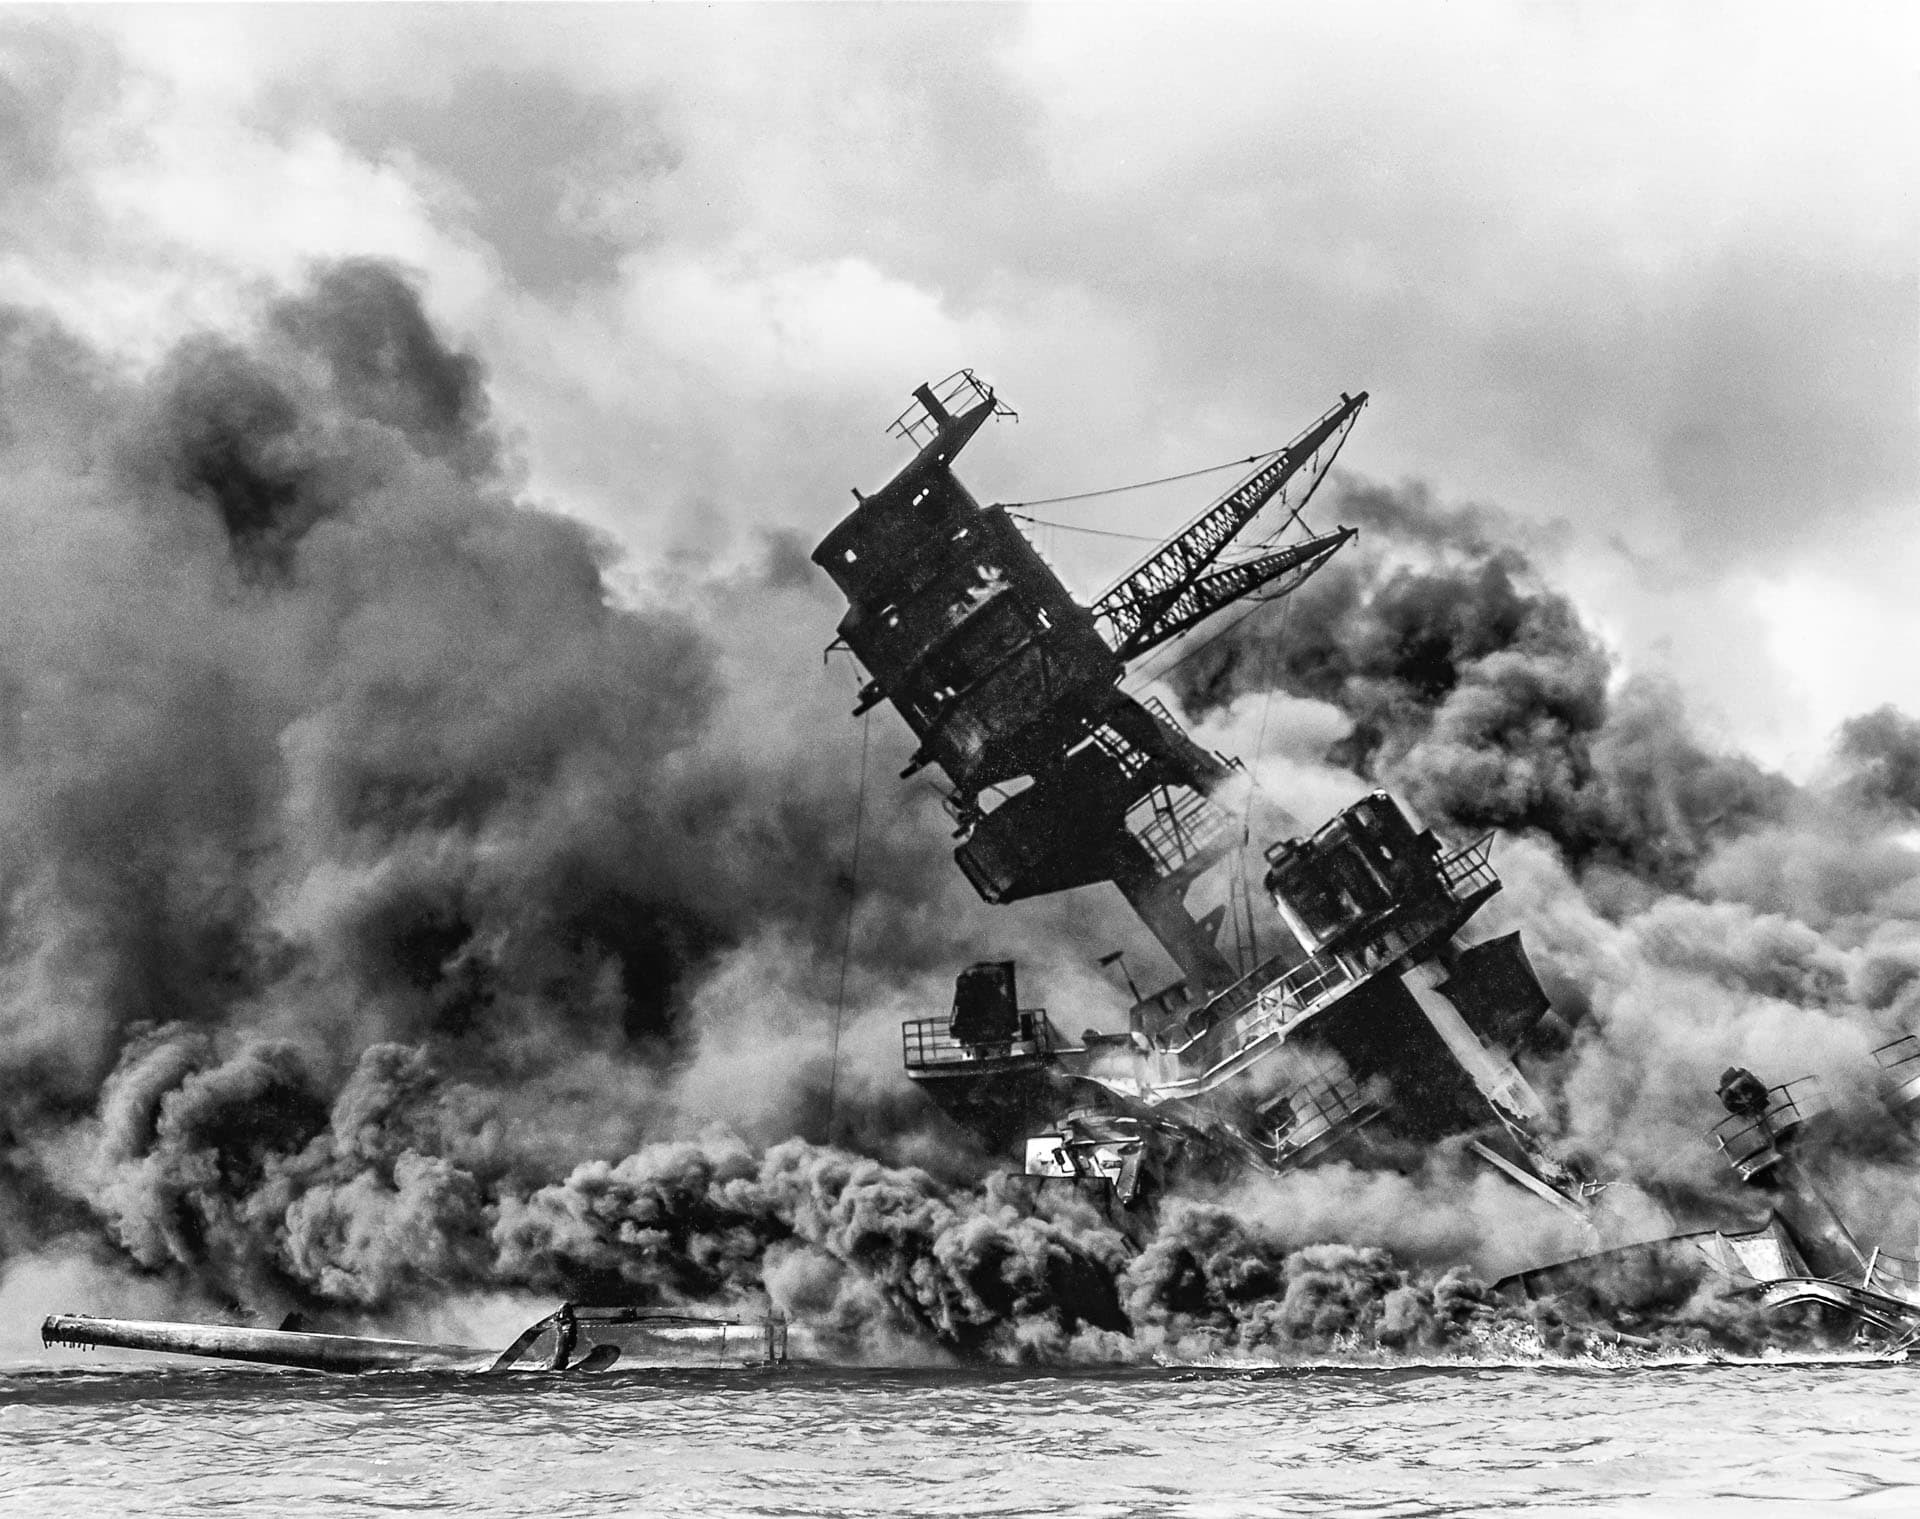 The_USS_Arizona_BB-39_burning_after_the_Japanese_attack_on_Pearl_Harbor_Dec-7th-1941-wikimedia.jpg